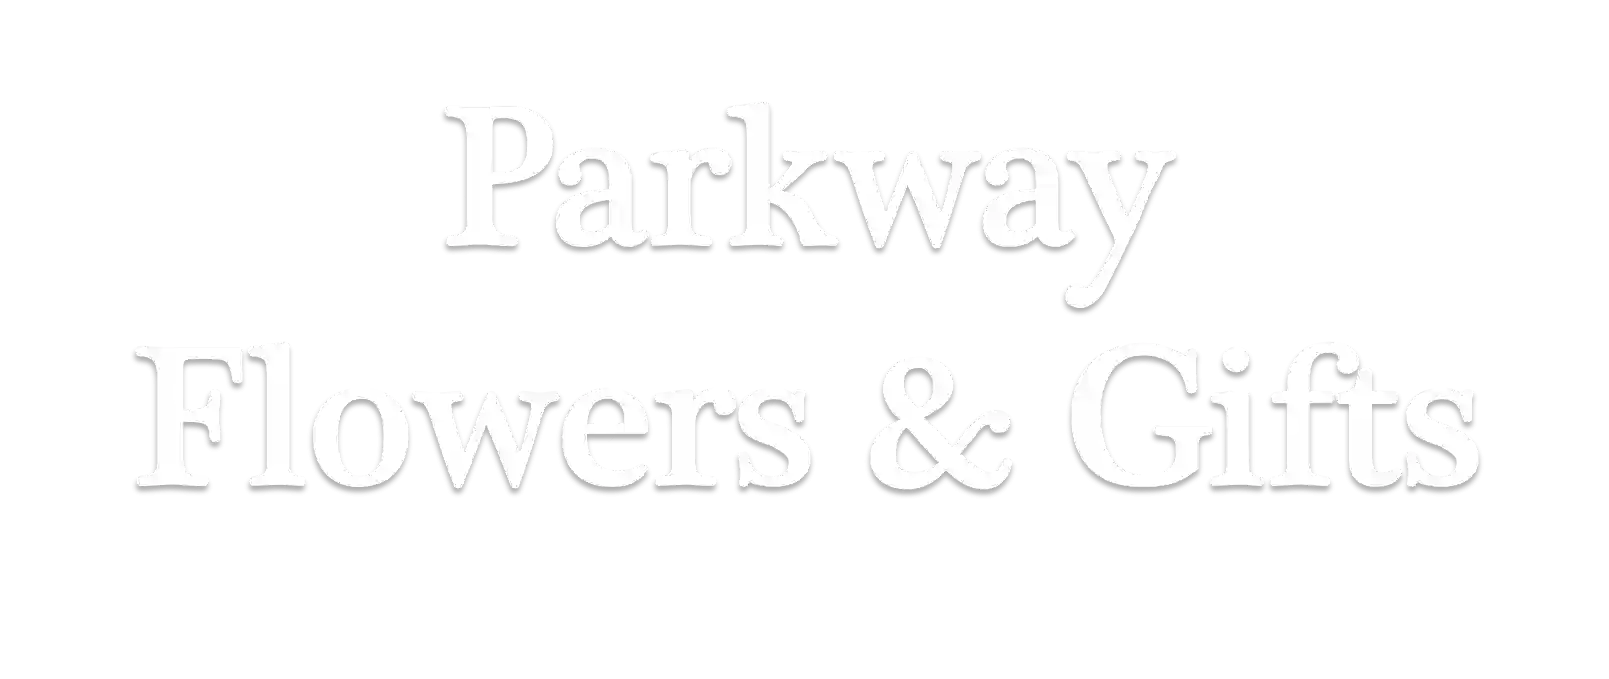 Parkway Flowers & Gift